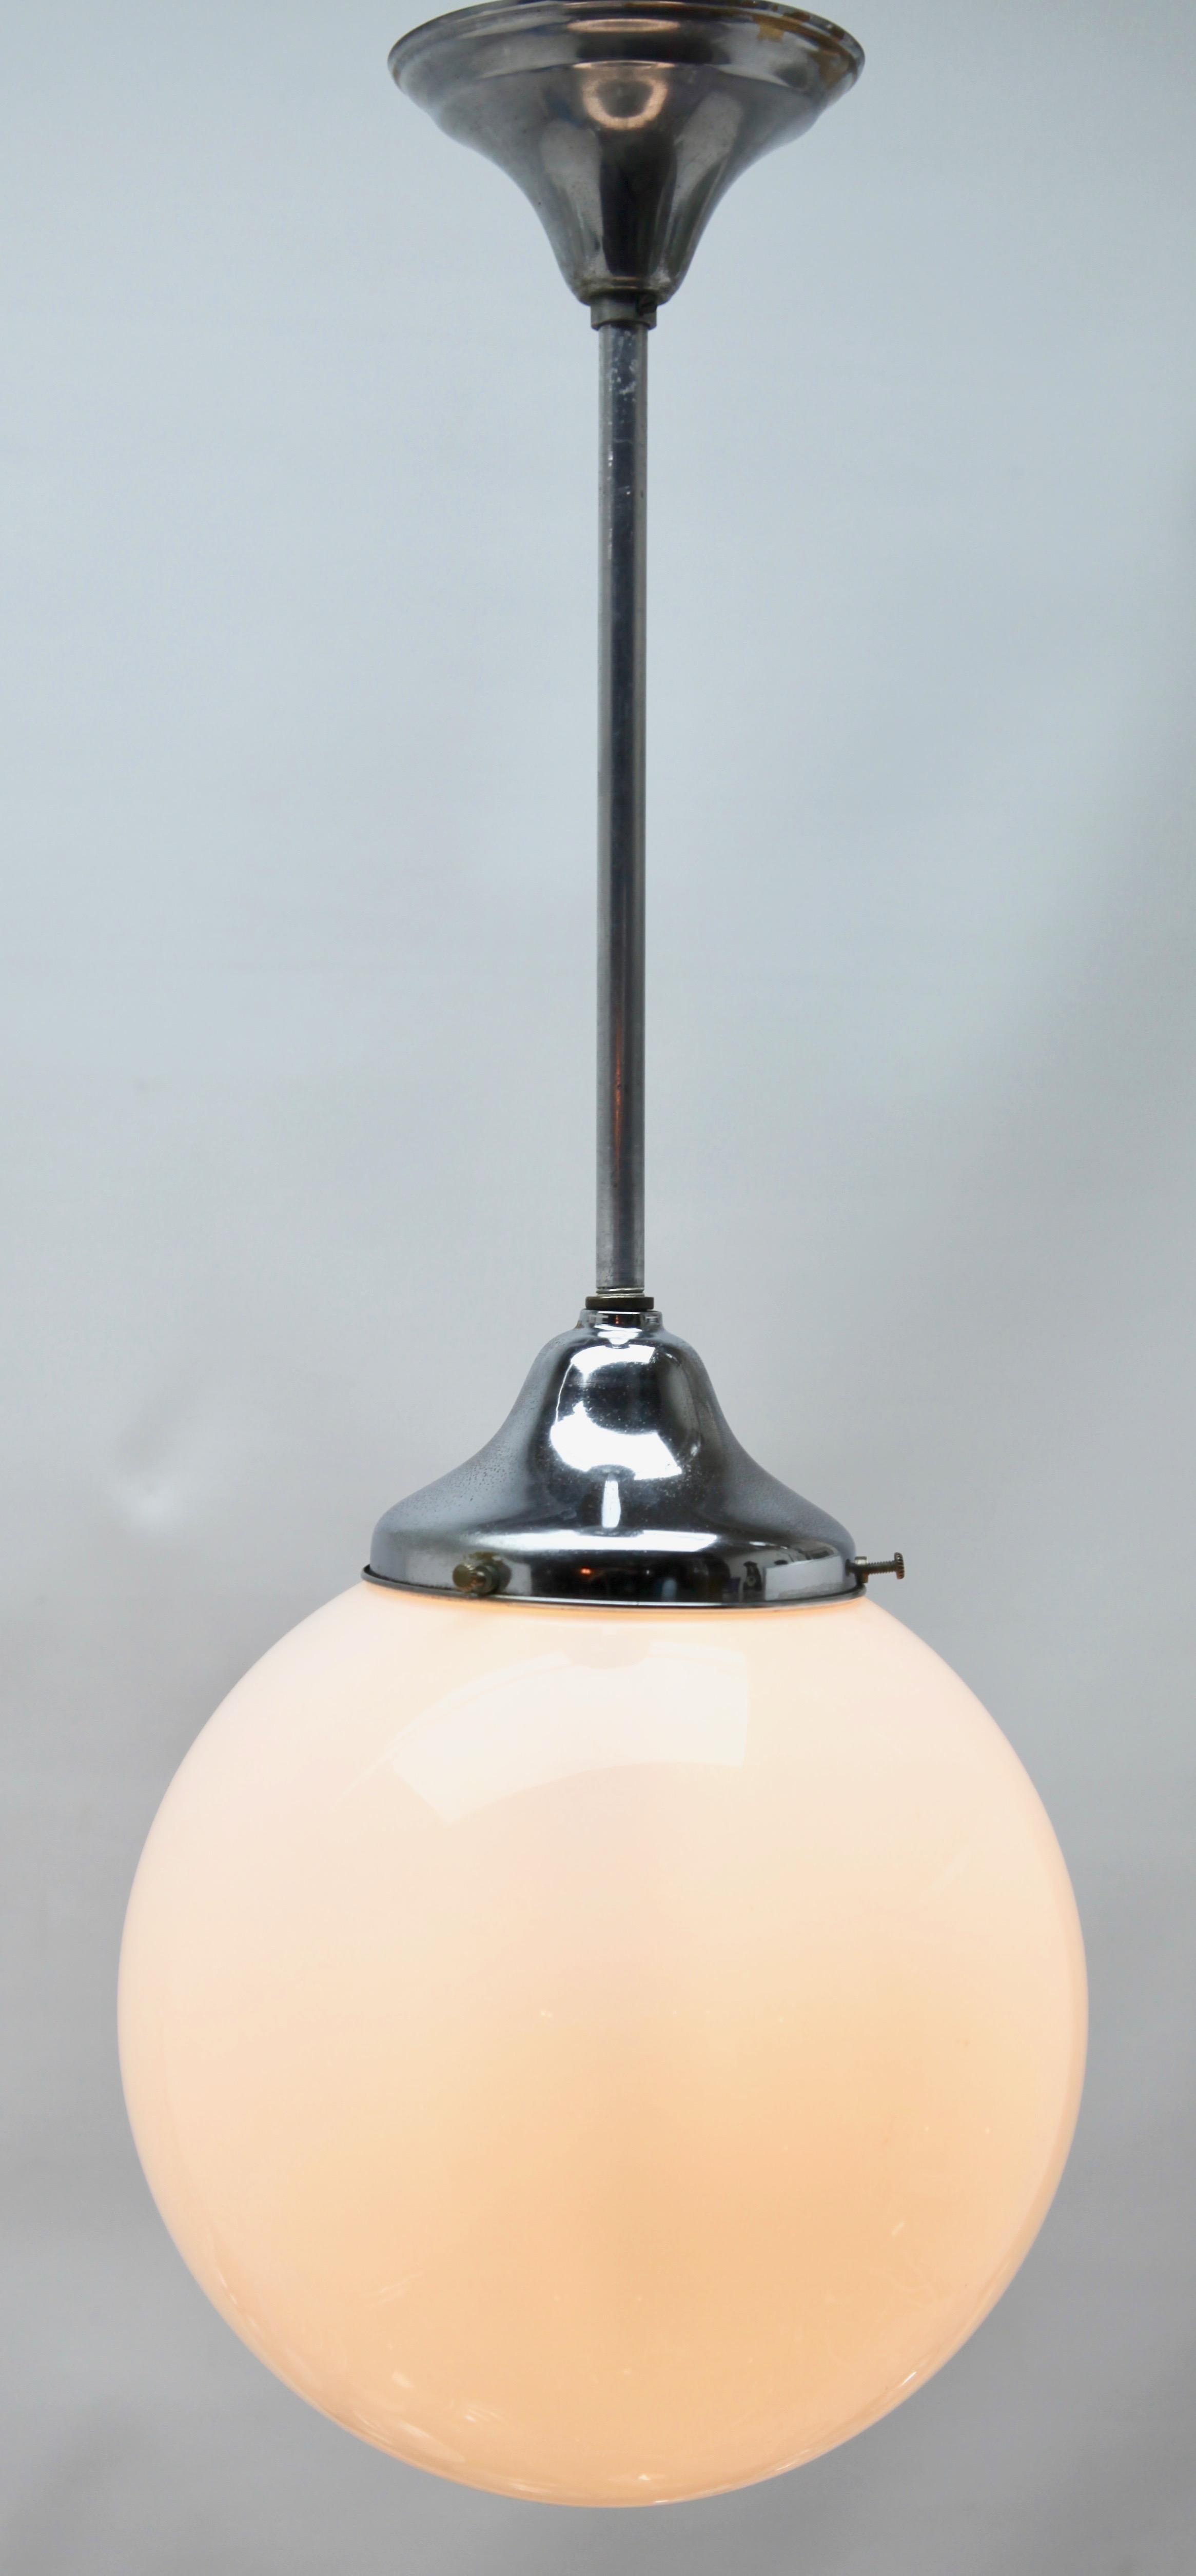 Metalwork Phillips Pendant Stem Lamp with a Globular Opaline Shade, 1930s, Netherlands For Sale